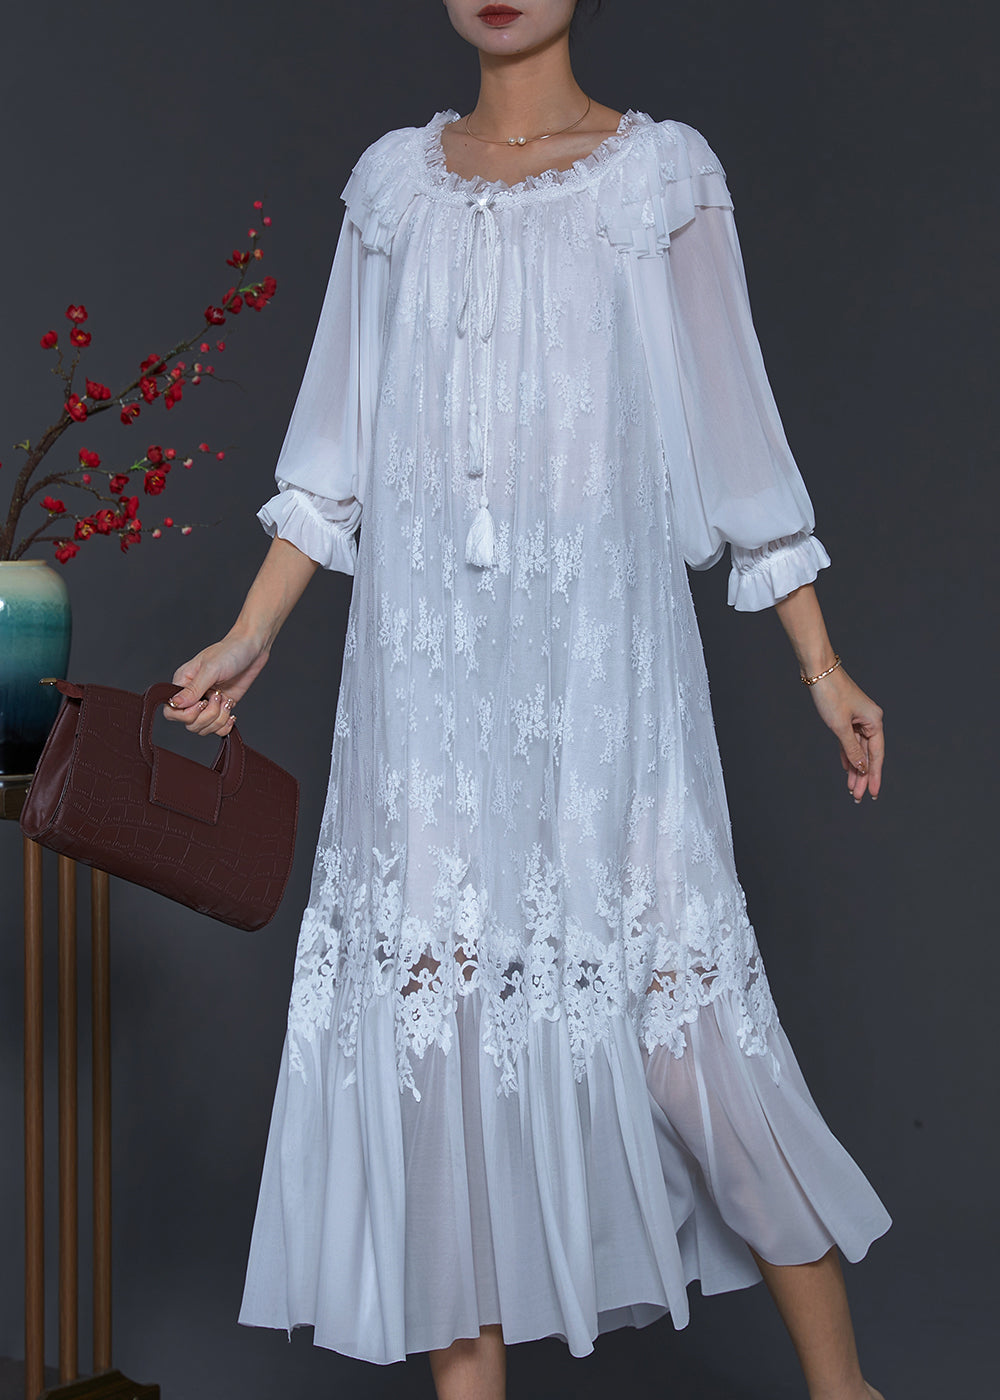 Elegant White Embroidered Patchwork Lace Dresses Spring